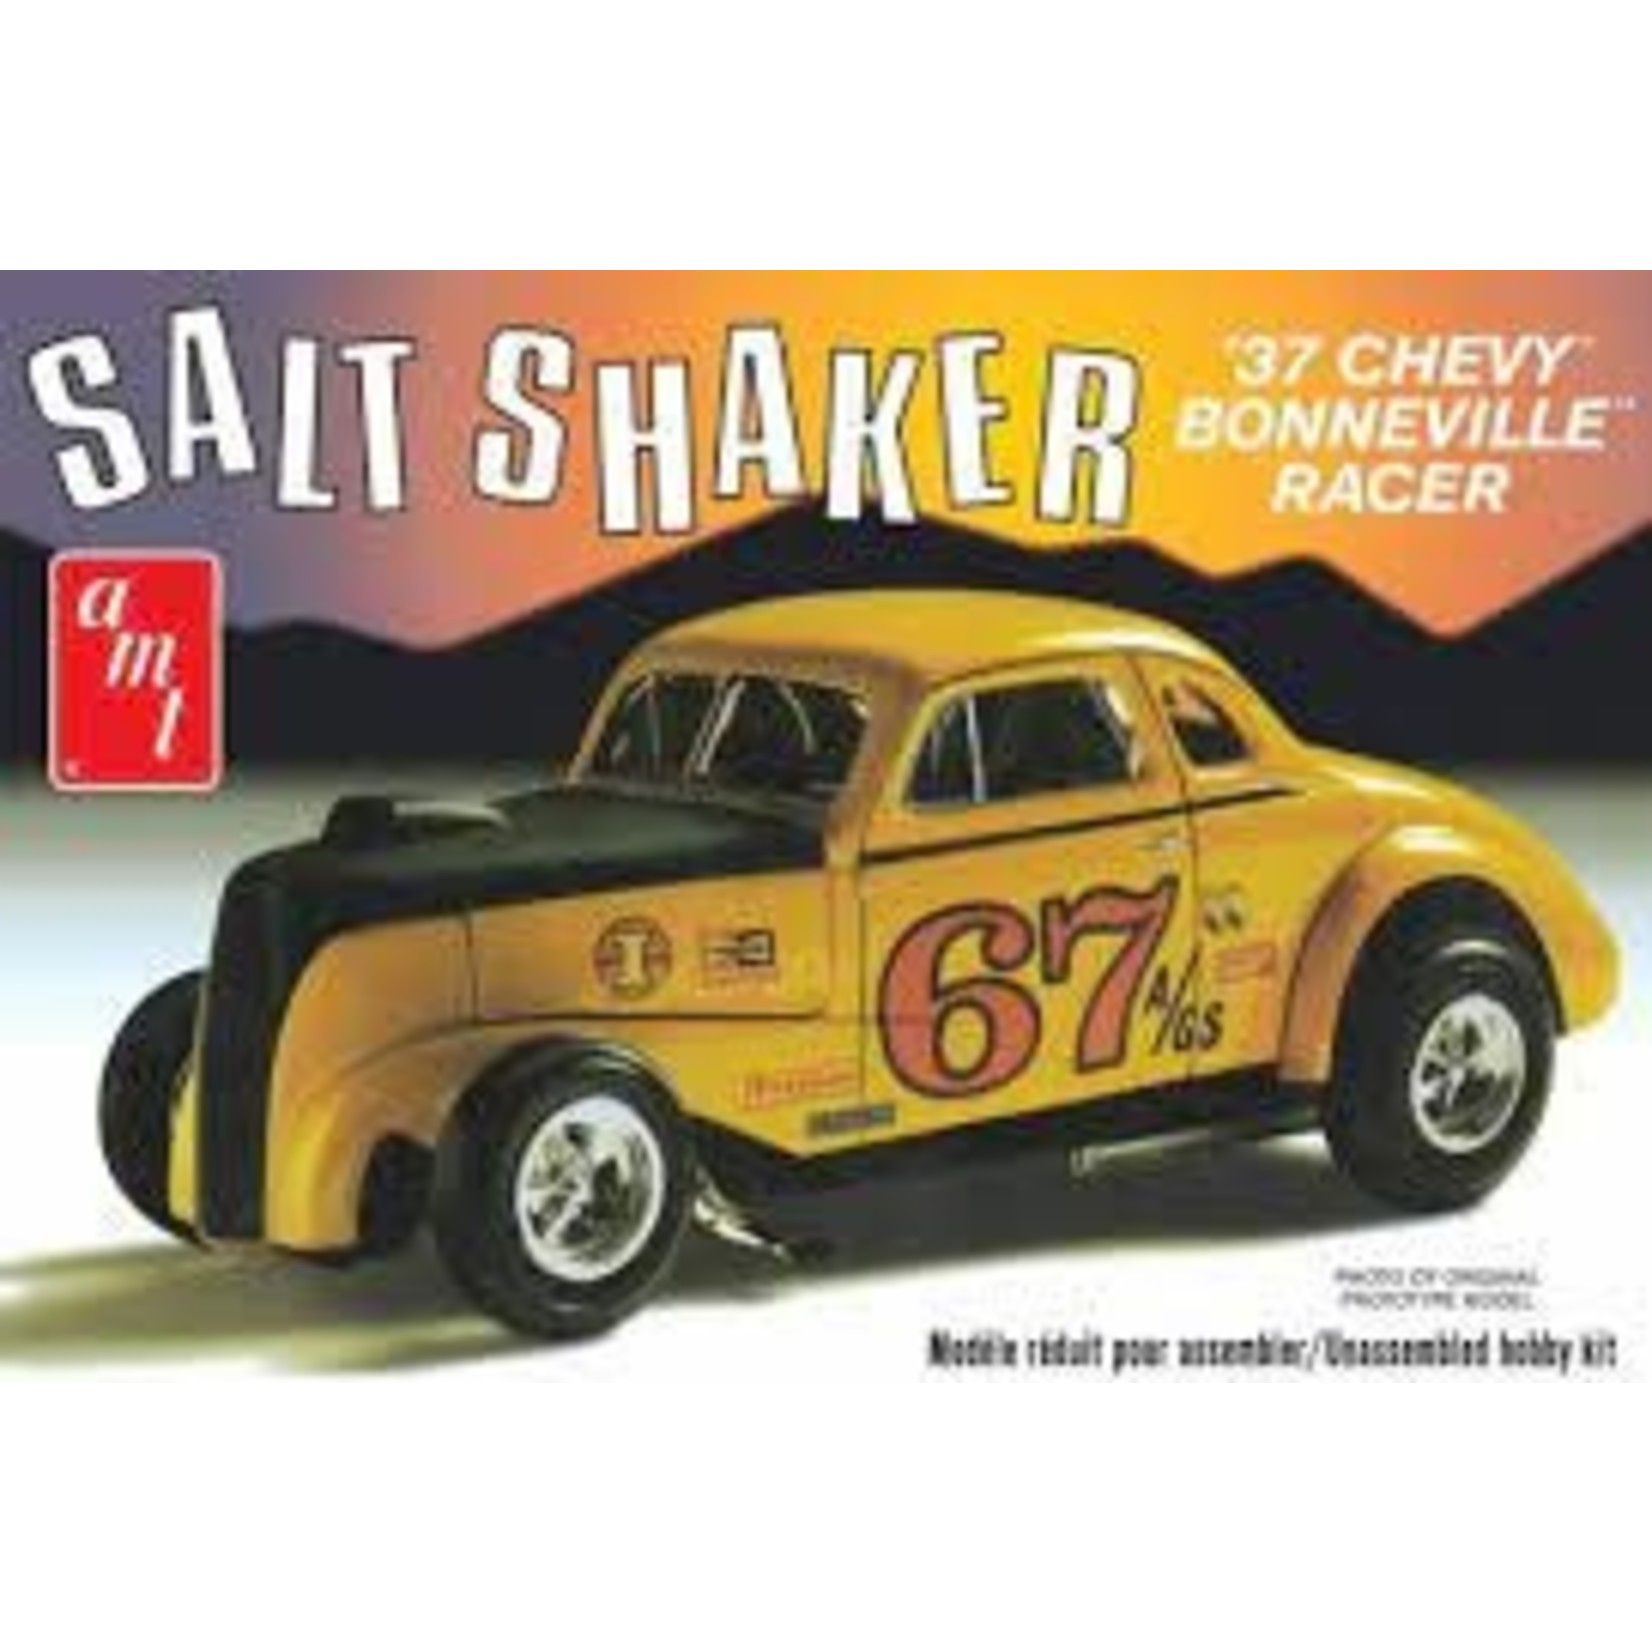 AMT 1937 Chevy Coupe "Salt Shaker" 1:25